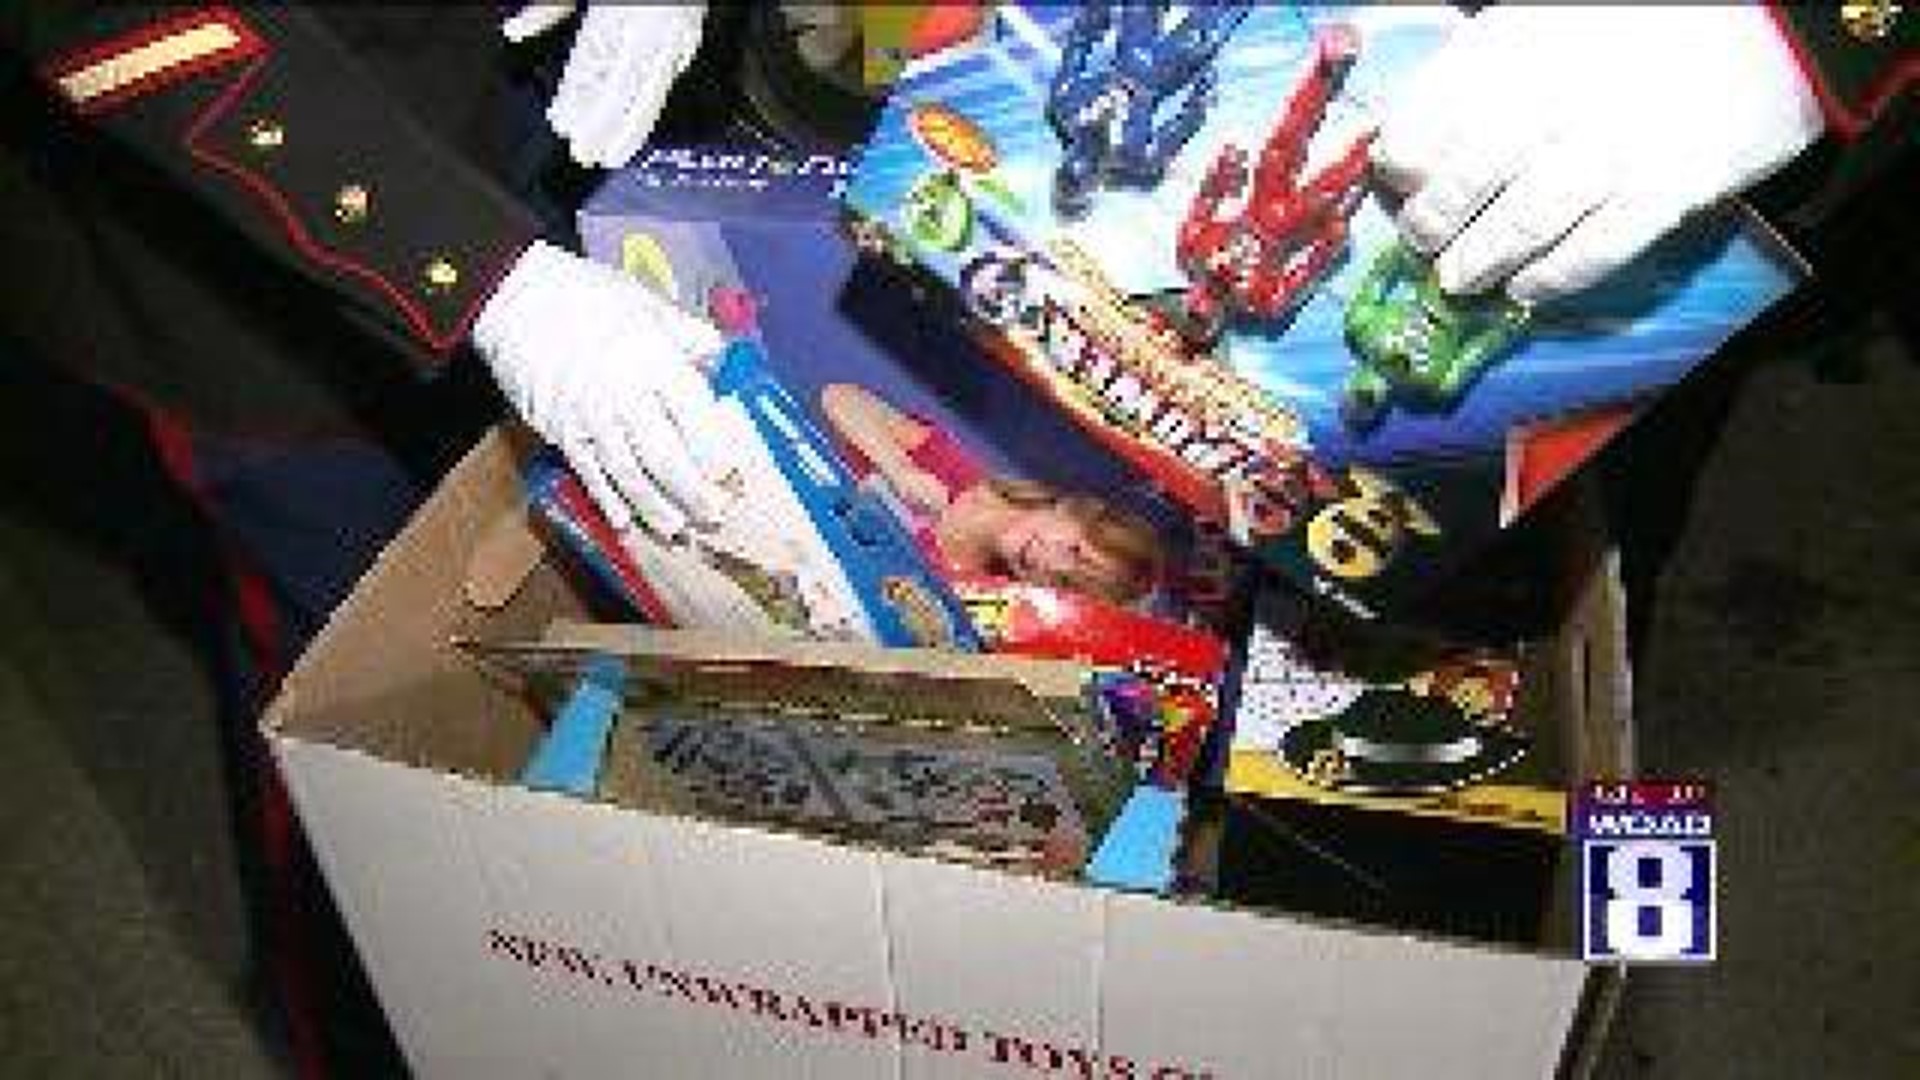 Morning Fun for Toys for Tots Drive